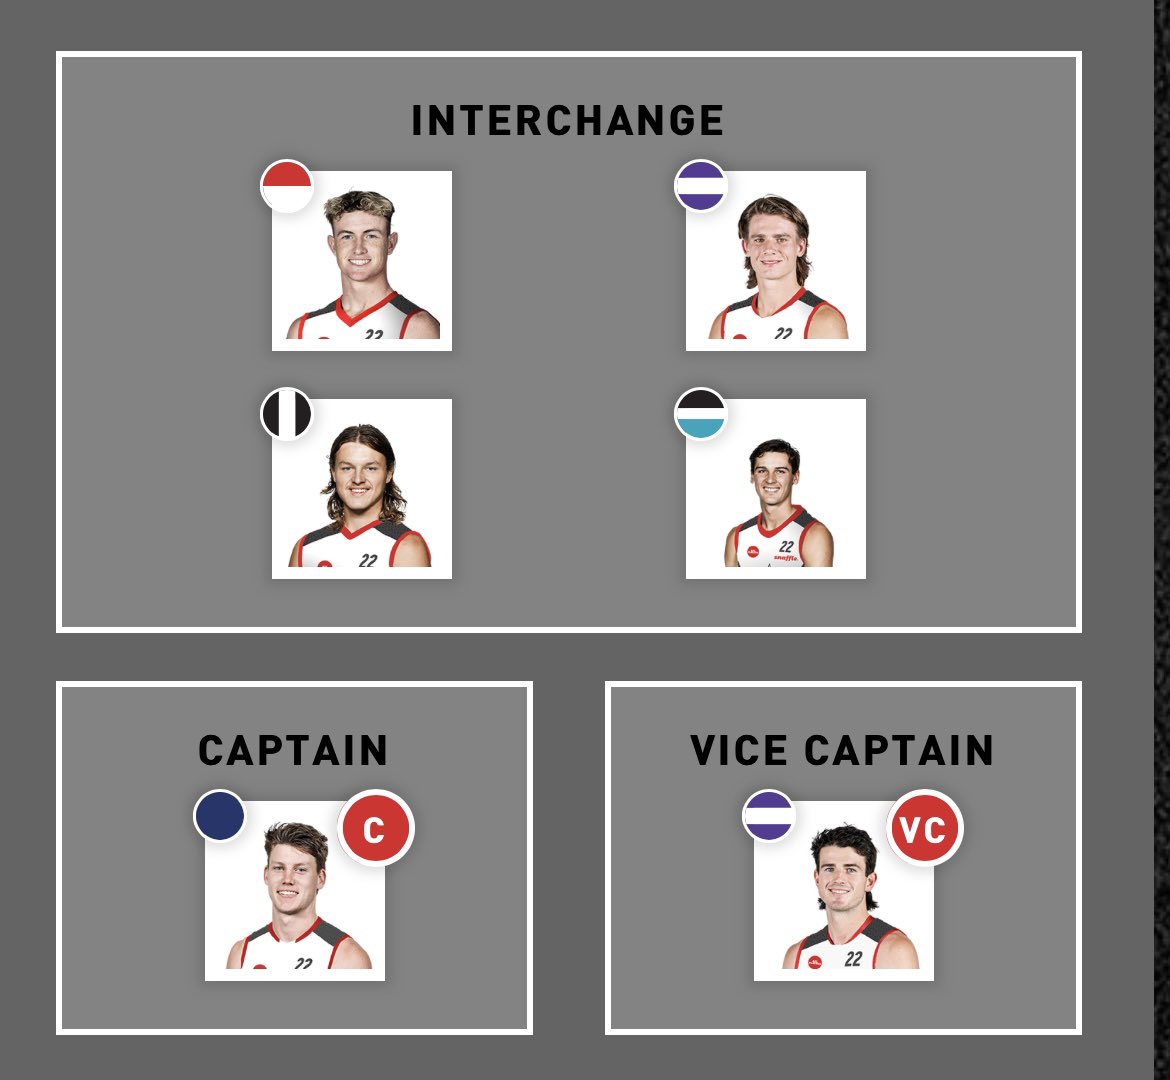 Thoughts on my @AFLPlayers 22under22 team?